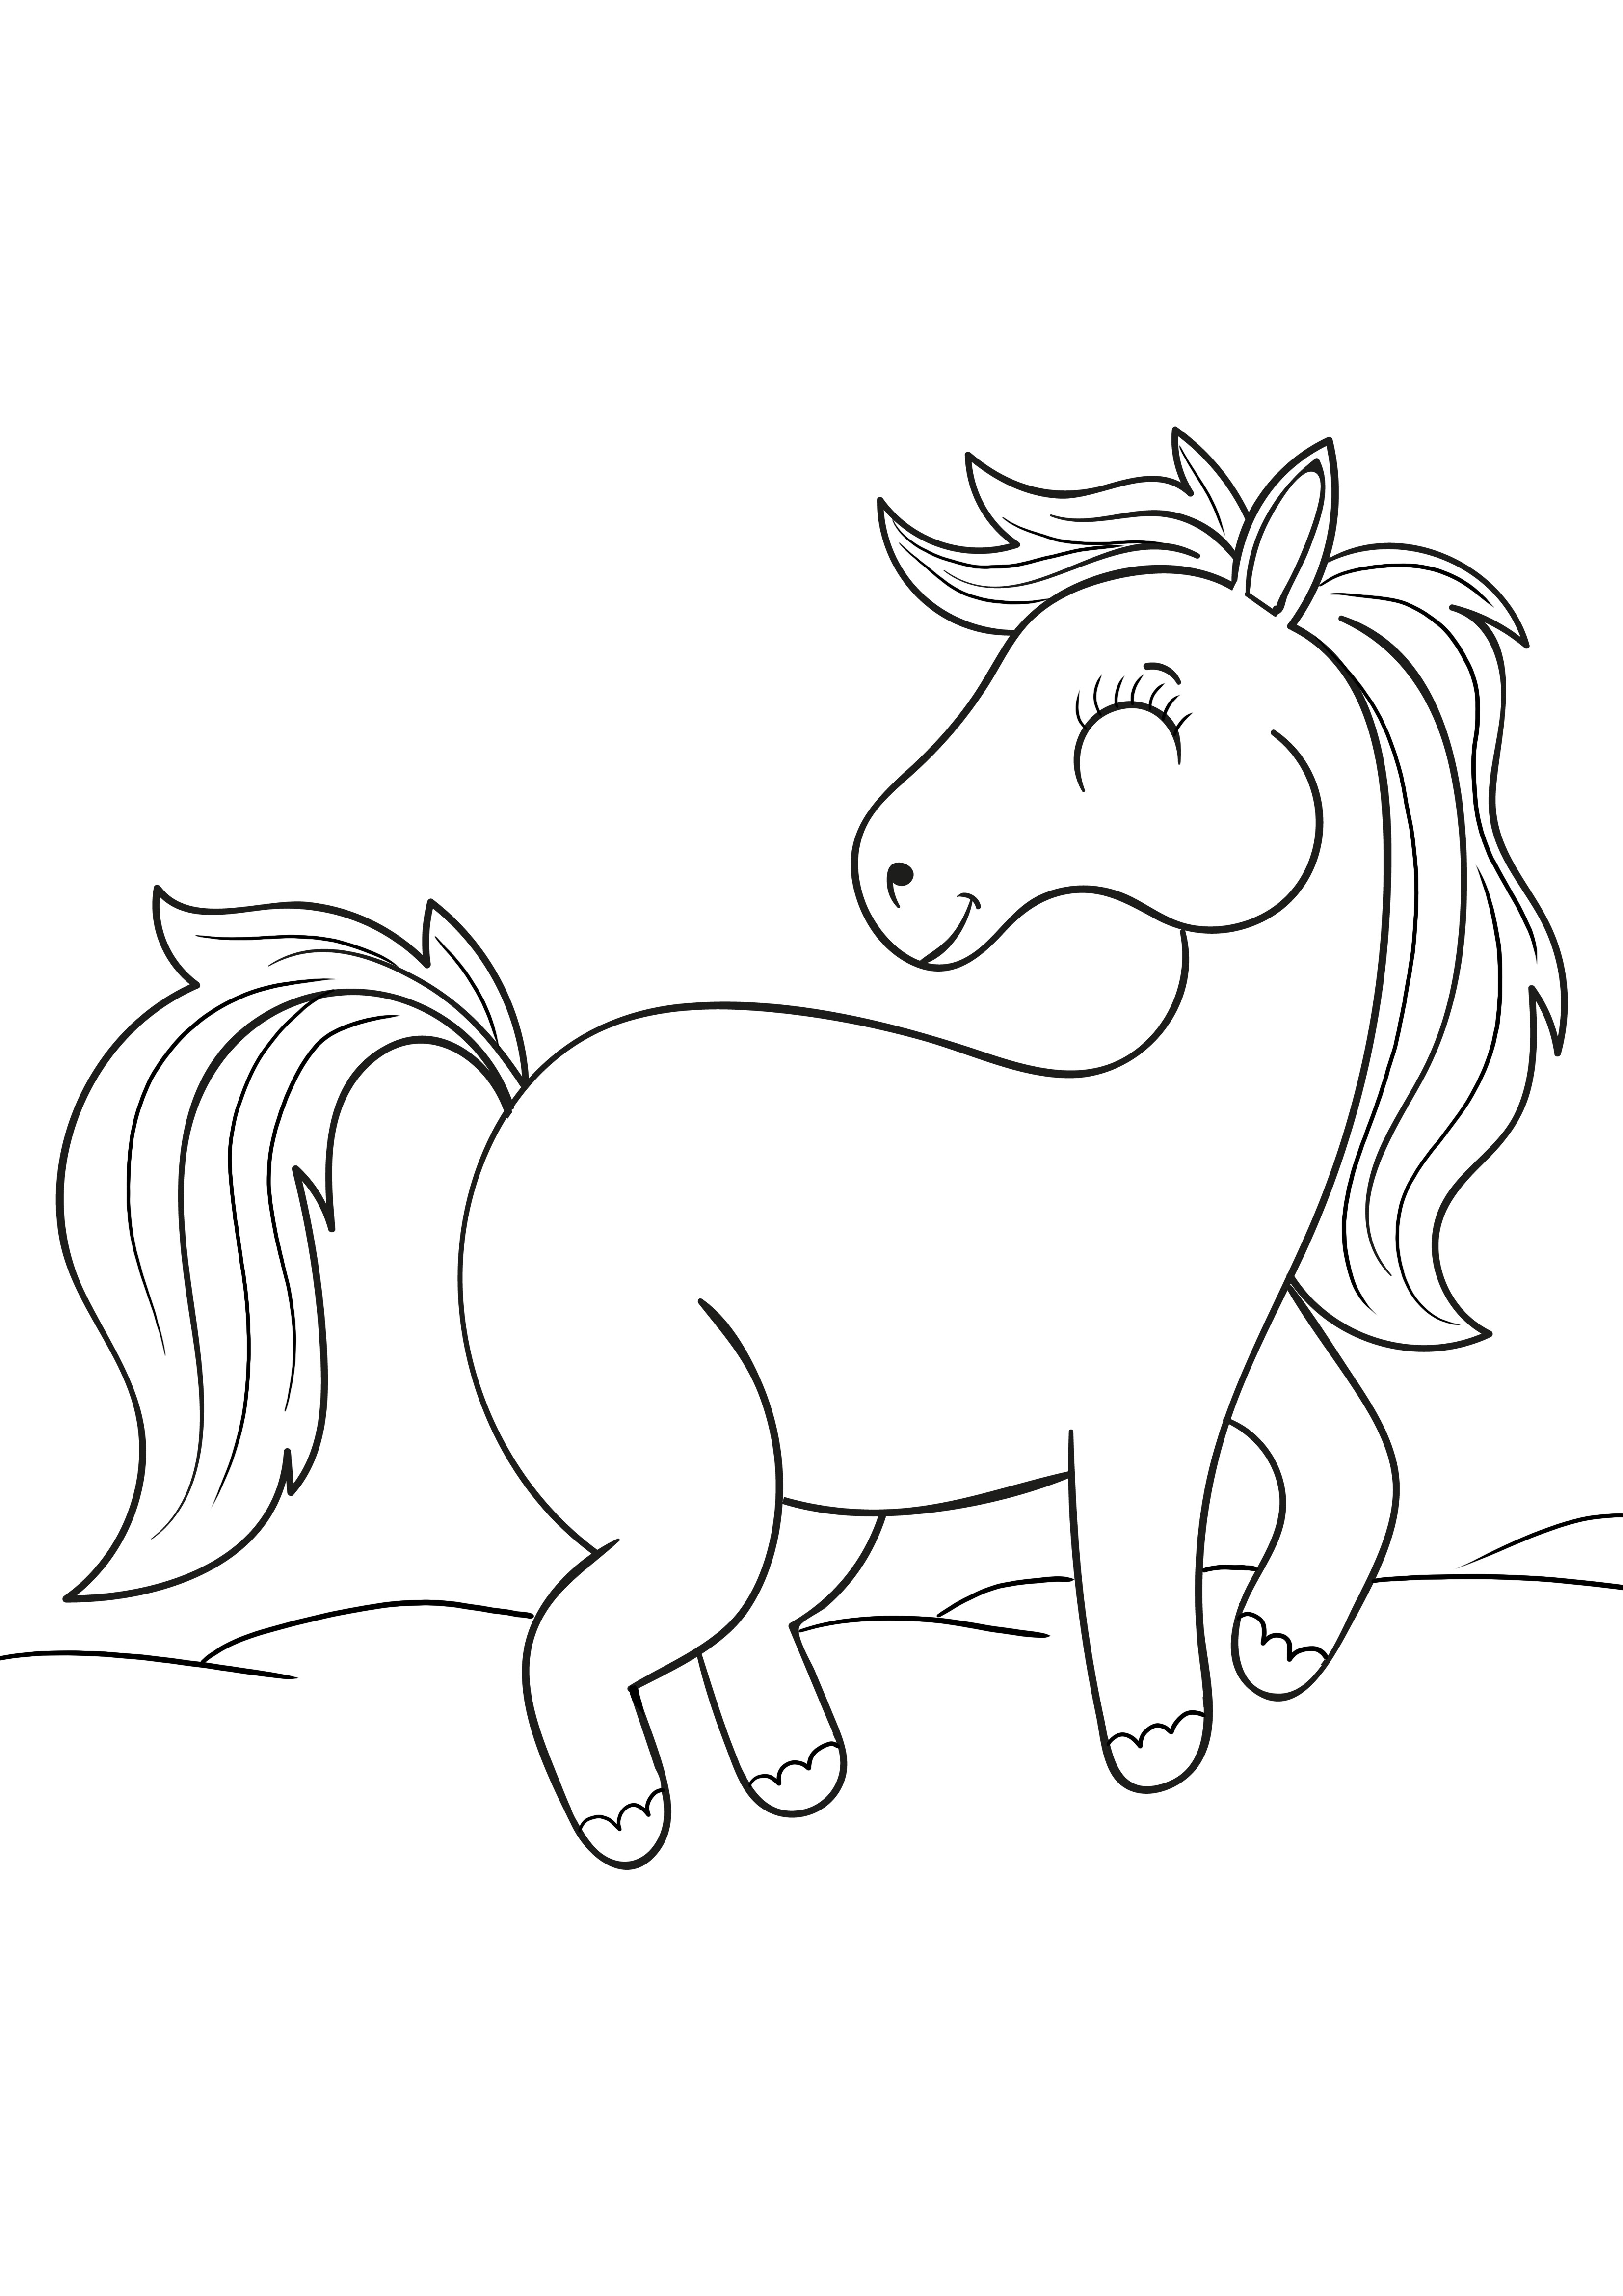 Here is our Happy Unicorn coloring picture free to download for kids